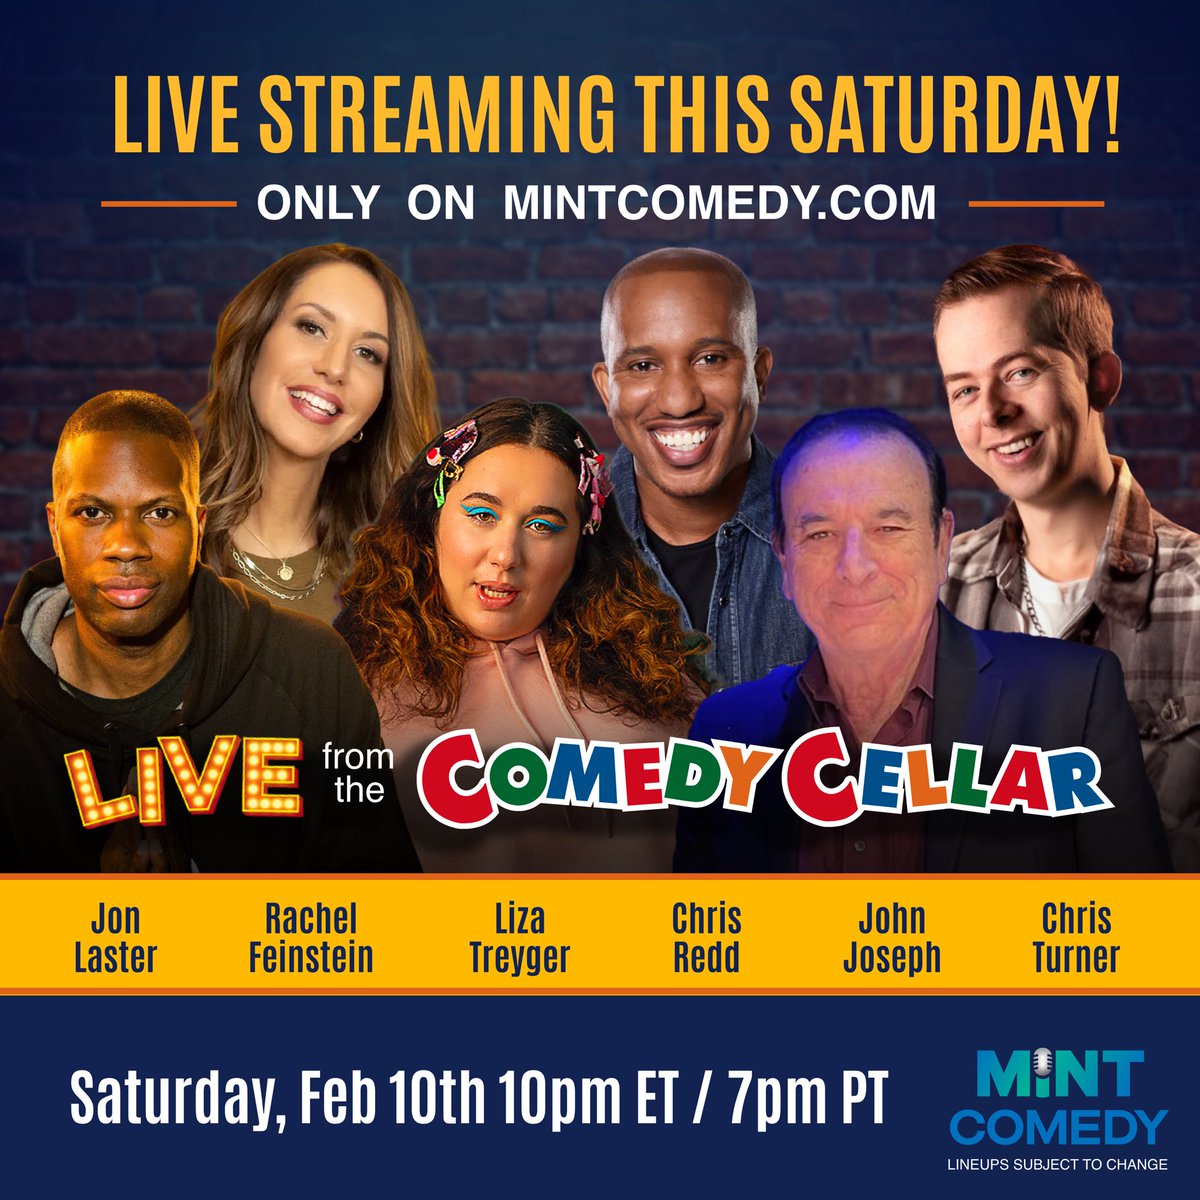 Experience NYC’s top comedy club from anywhere in the world by tuning into our livestream this Saturday! Watch six comedians perform LIVE from the @ComedyCellarUSA this Saturday at 10pm ET / 7pm PT, exclusively on mintcomedy.com 👀 Sign up with your favorite comedian’s…